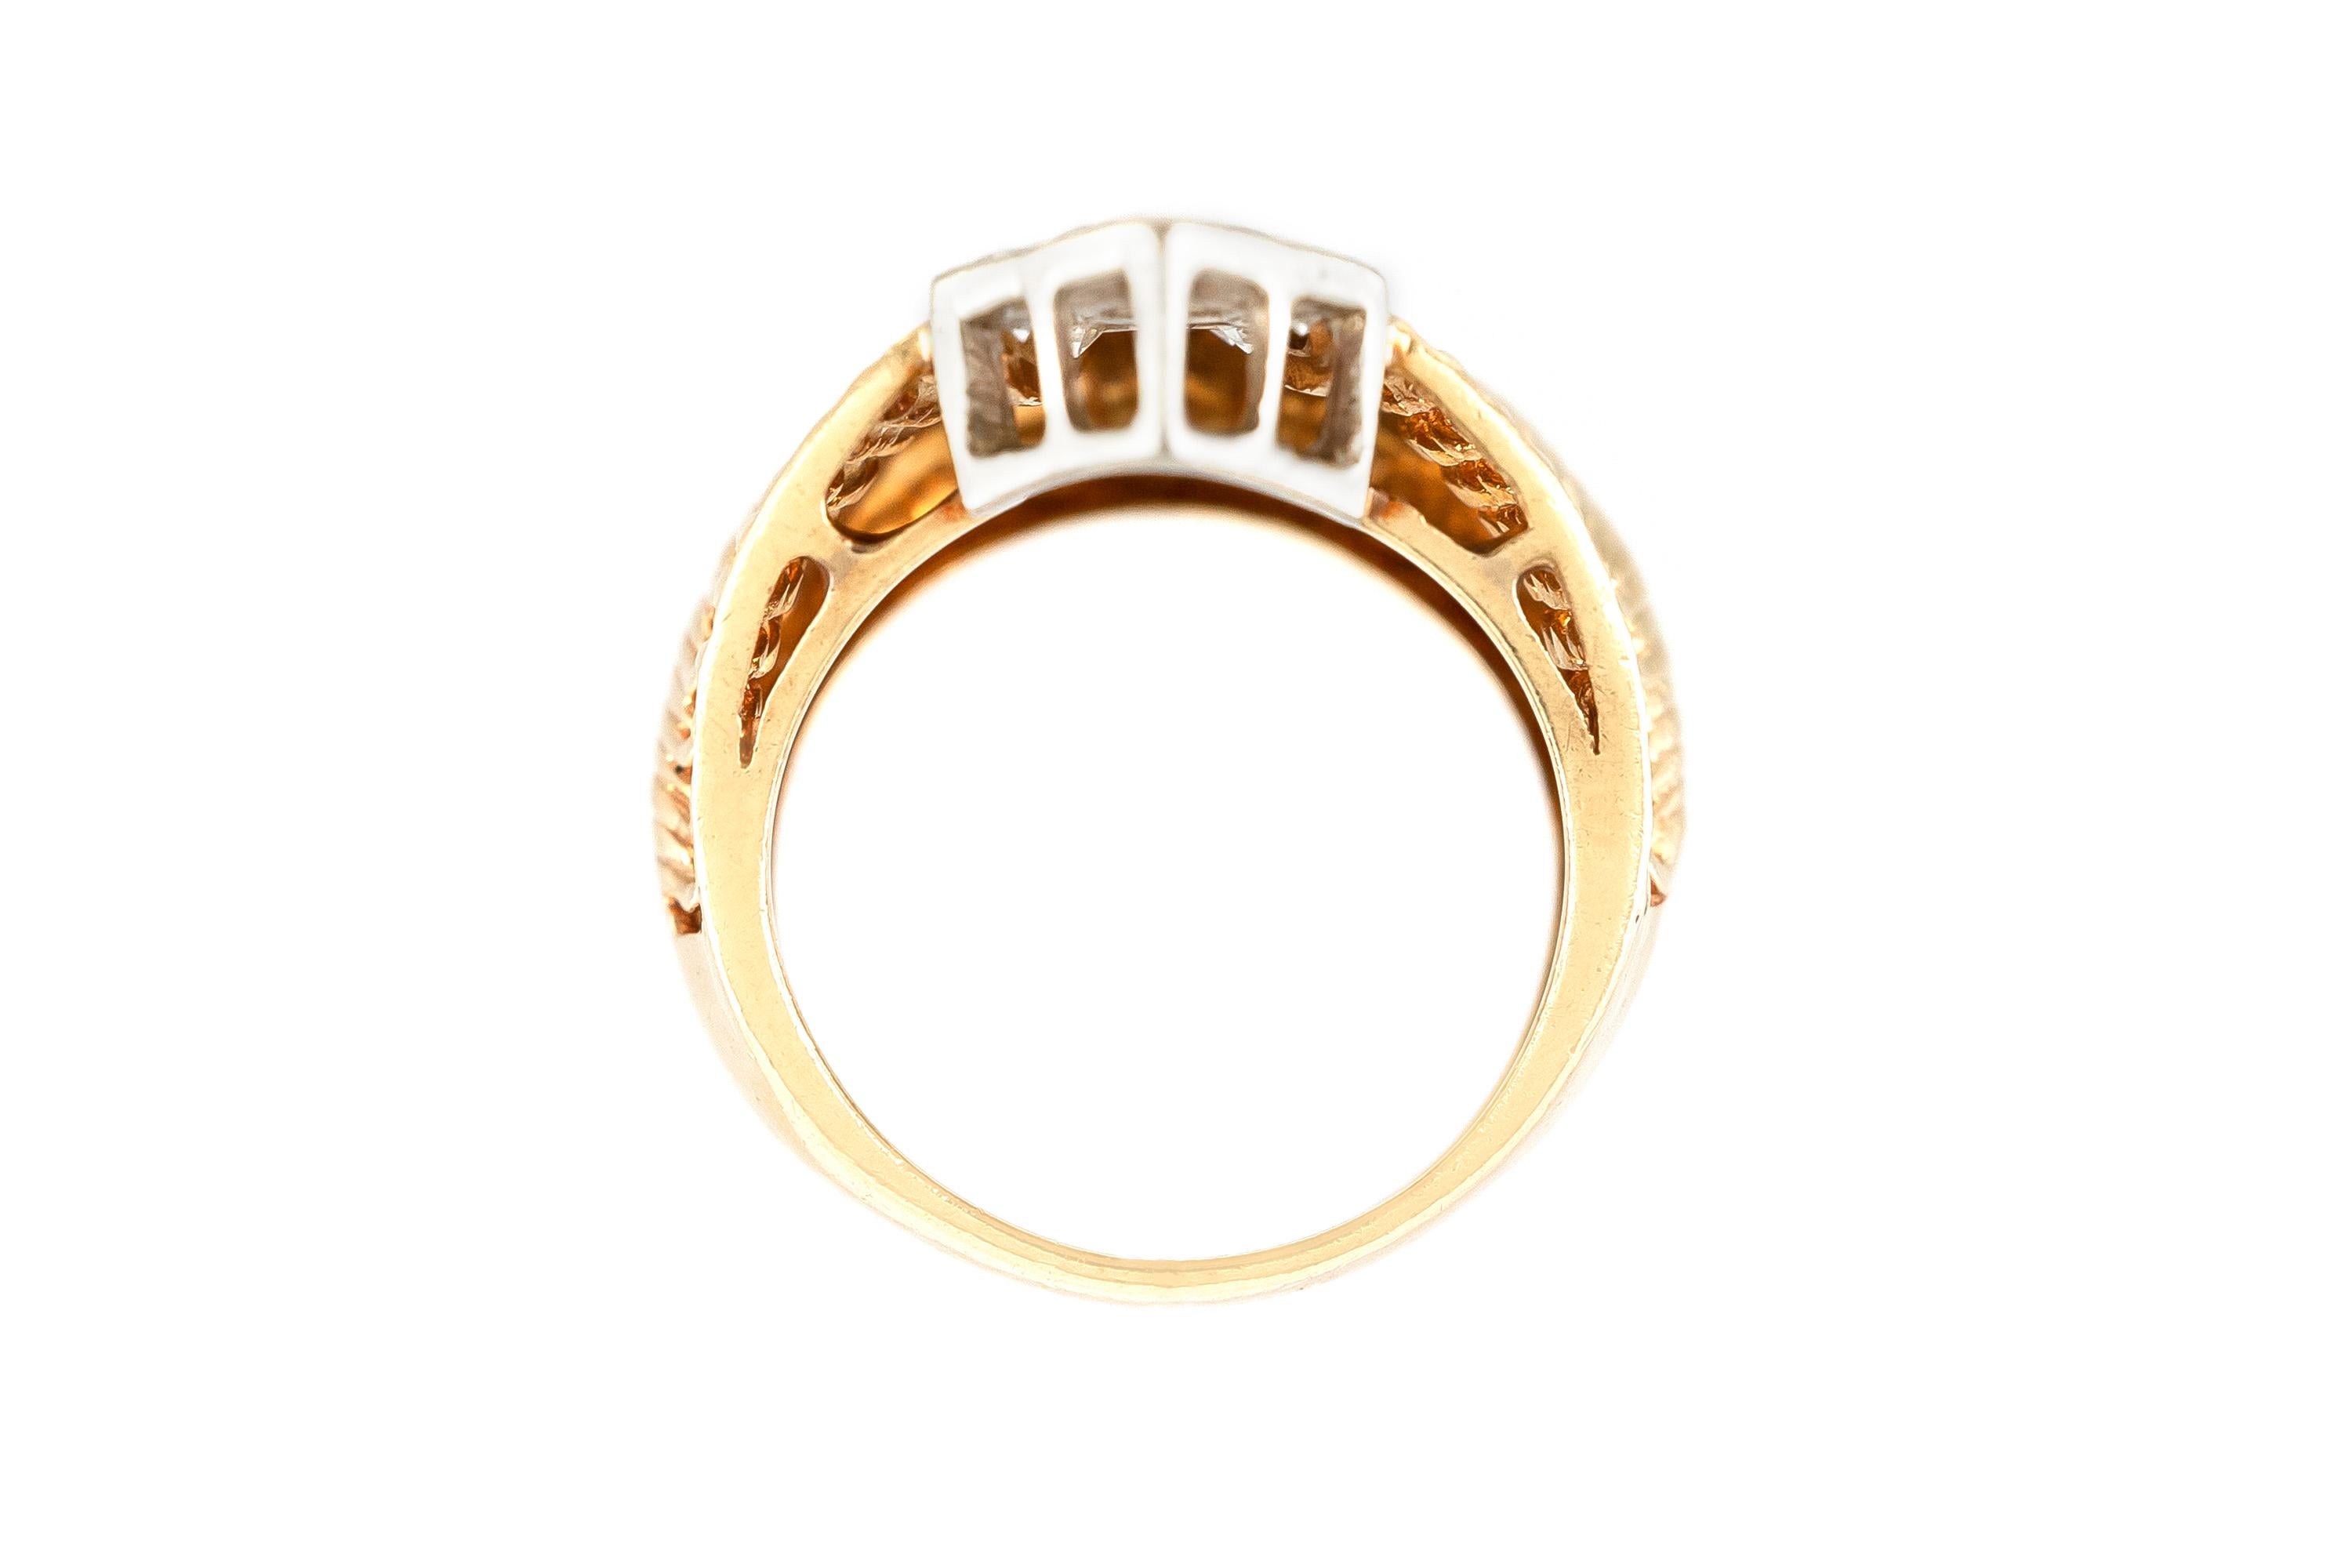 The ring is finely crafted in 14k yellow gold with diamonds weighing approximately total of 1.50 carat.
Circa 1960